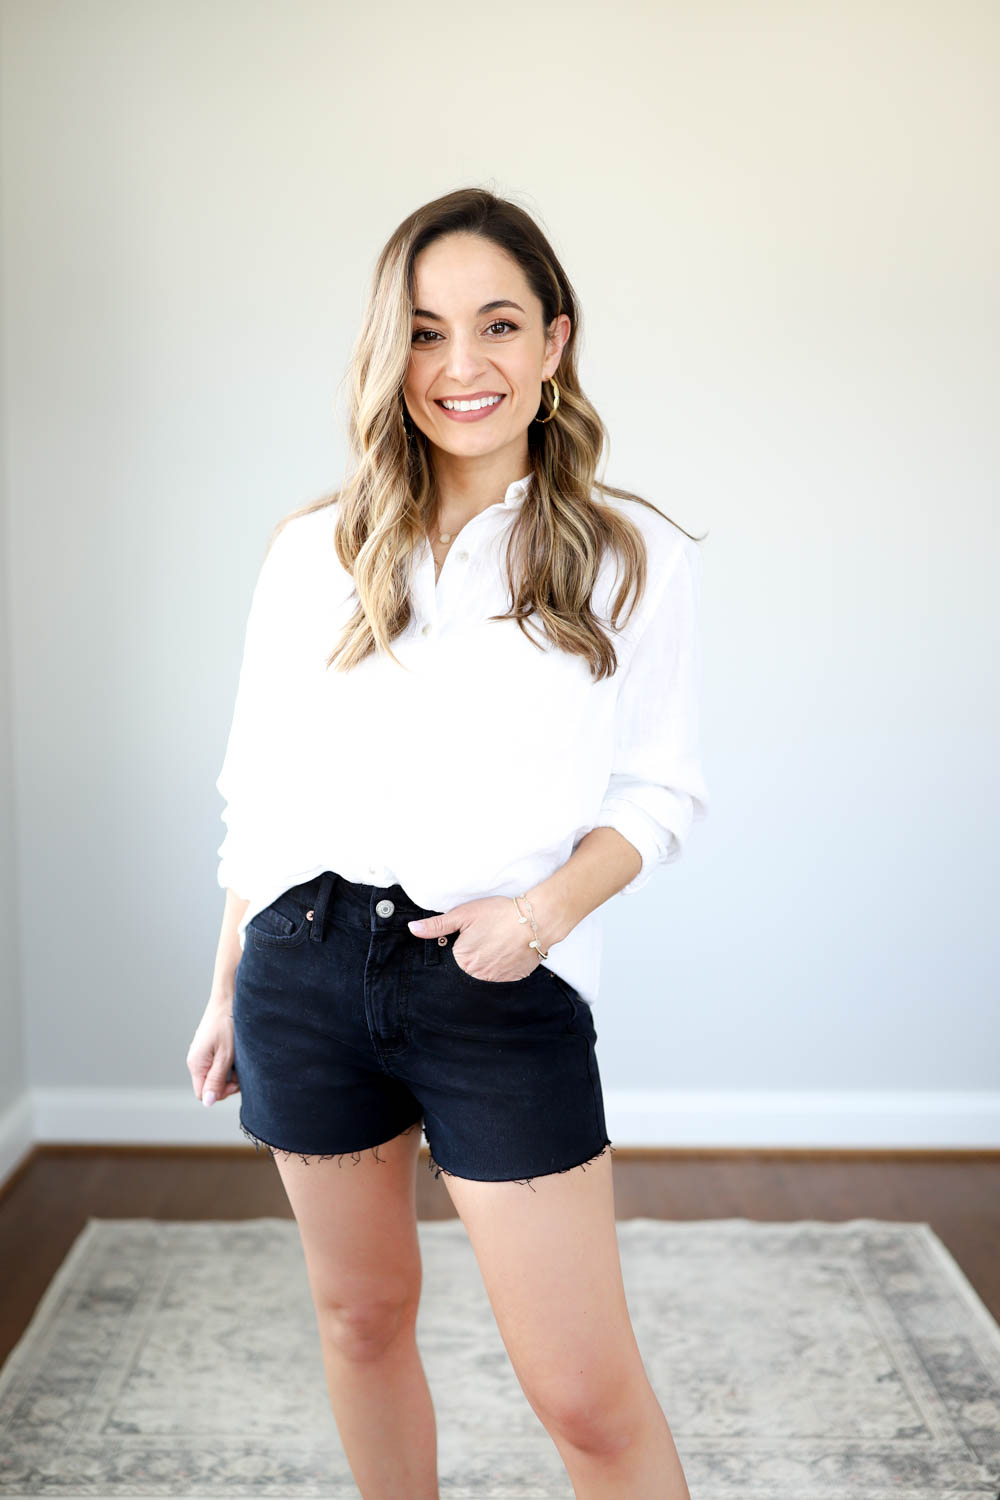 Old Navy O.G. Shorts styled by petite style blogger, Brooke of Pumps and Push-Ups | Petite style | summer shorts | comfortable shorts 